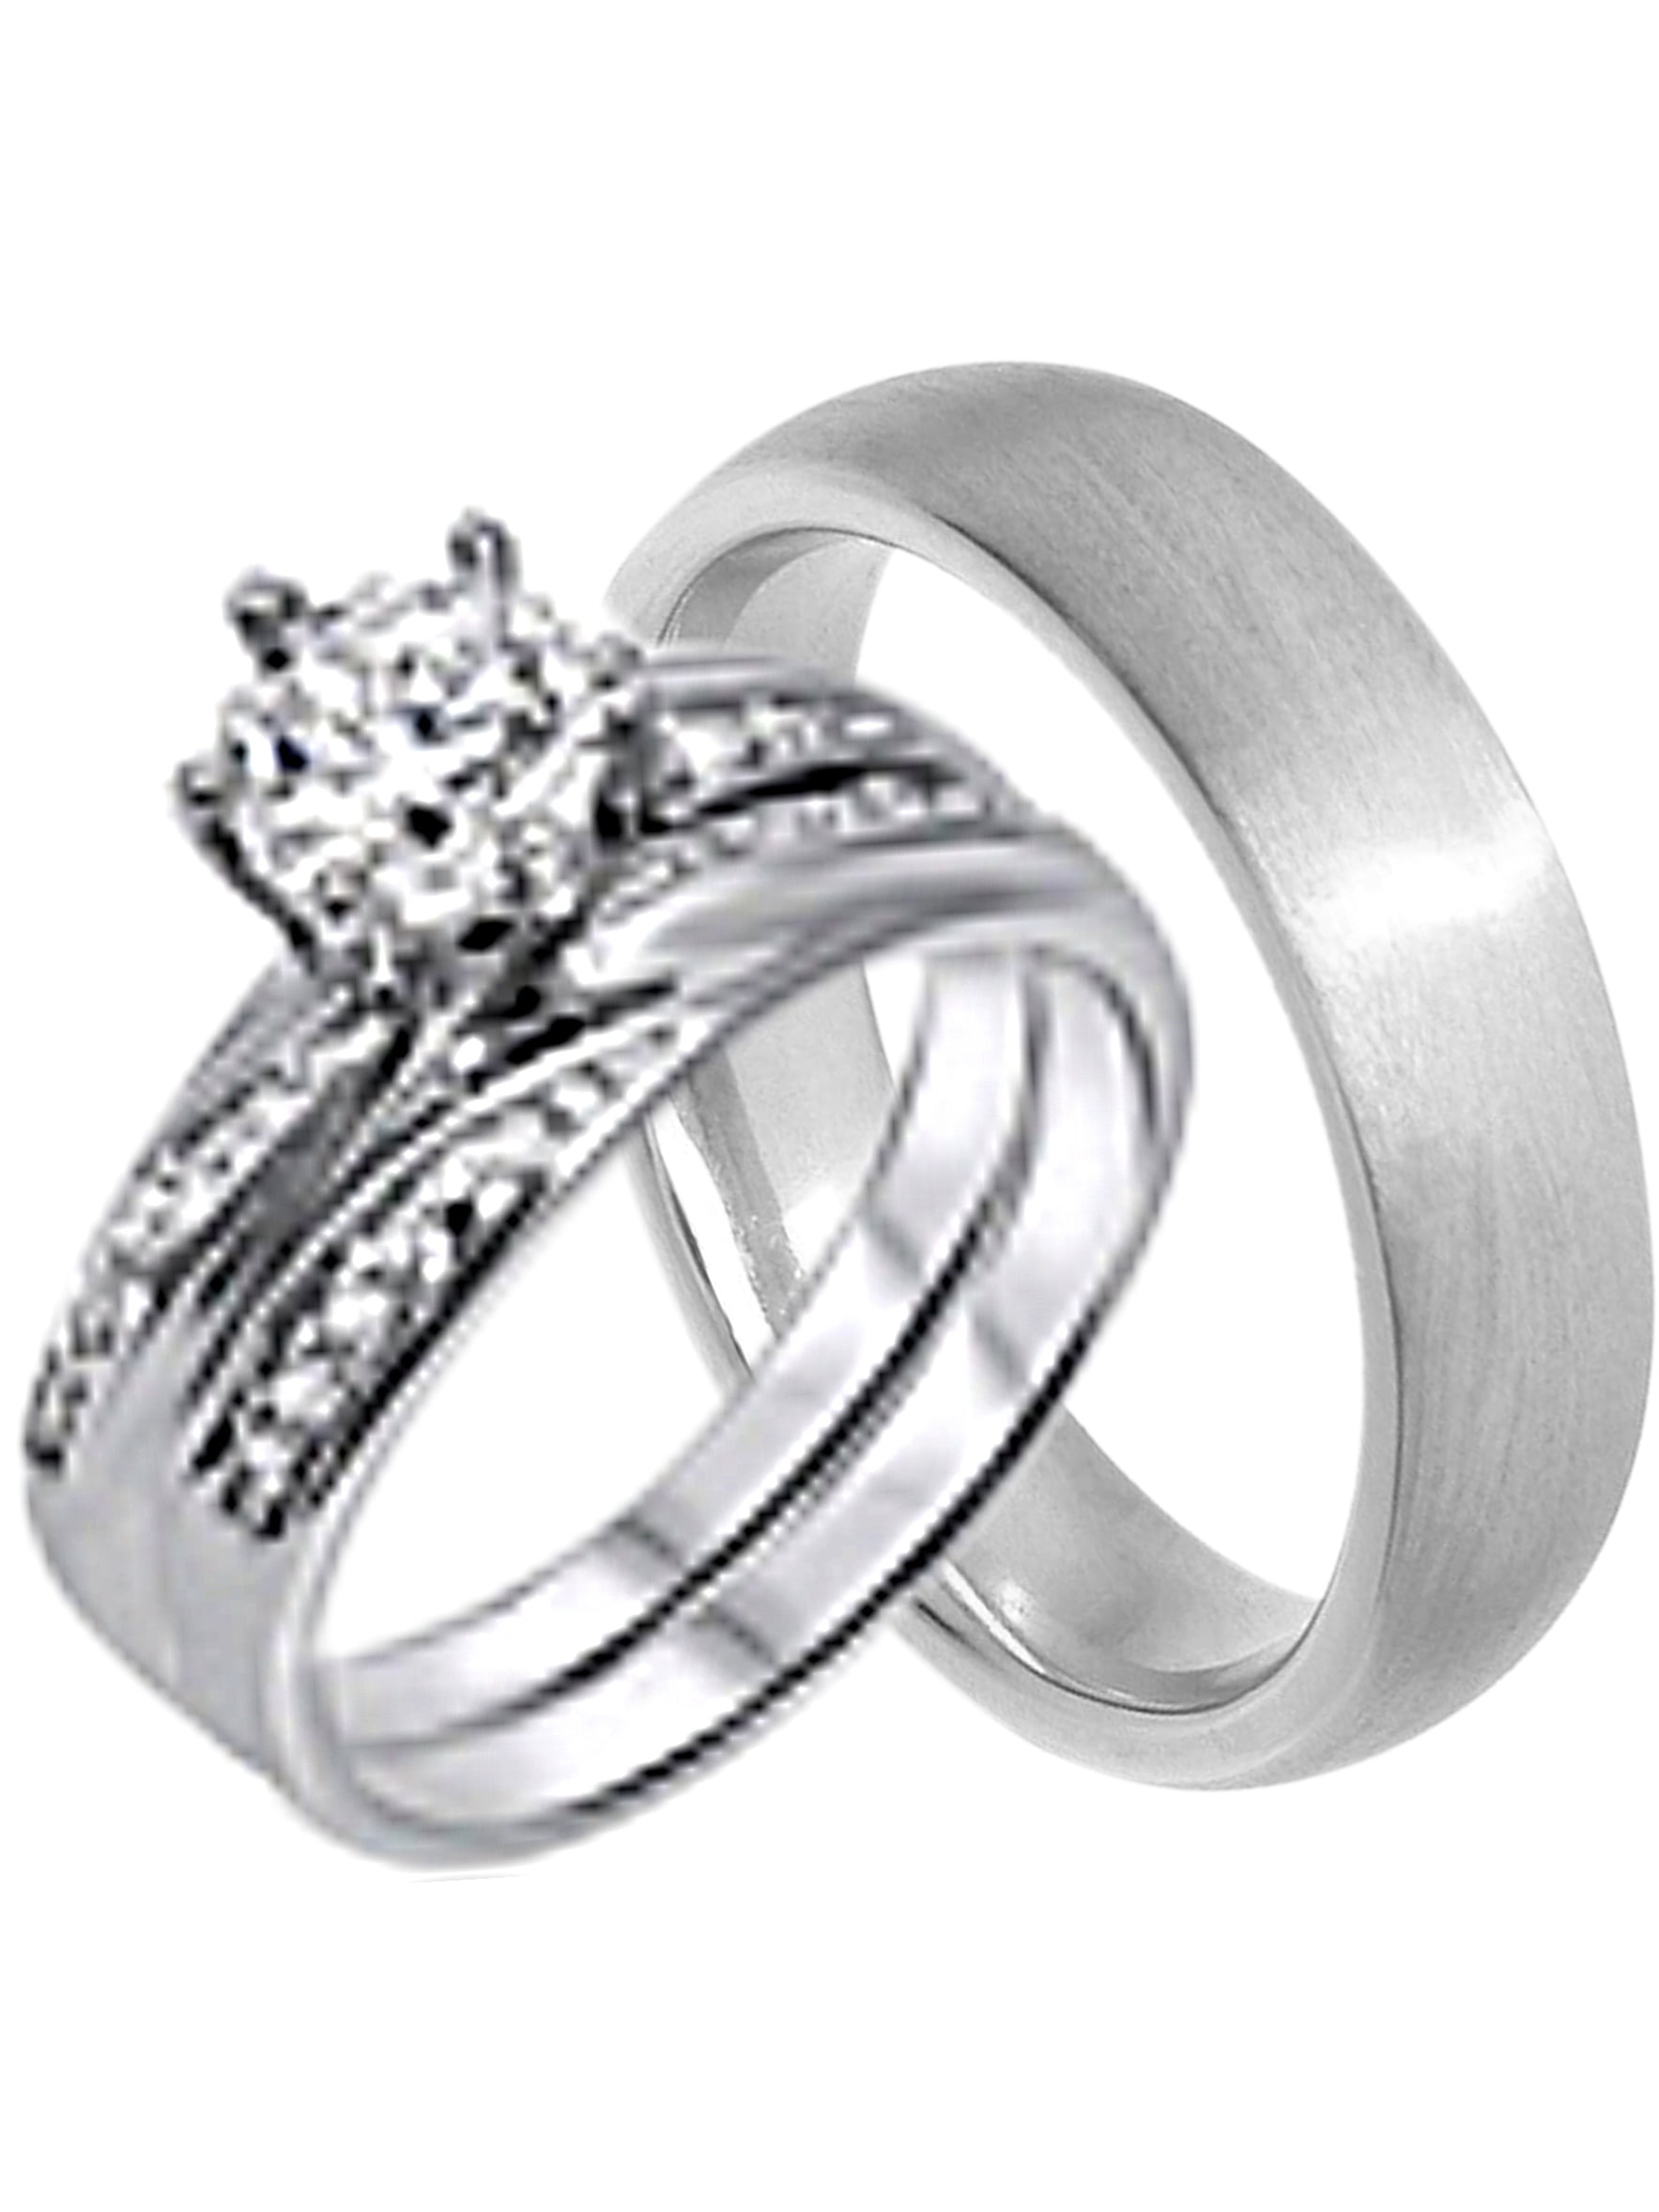 His and Hers Wedding Ring Set Cheap Wedding Bands for Him and Her - 0